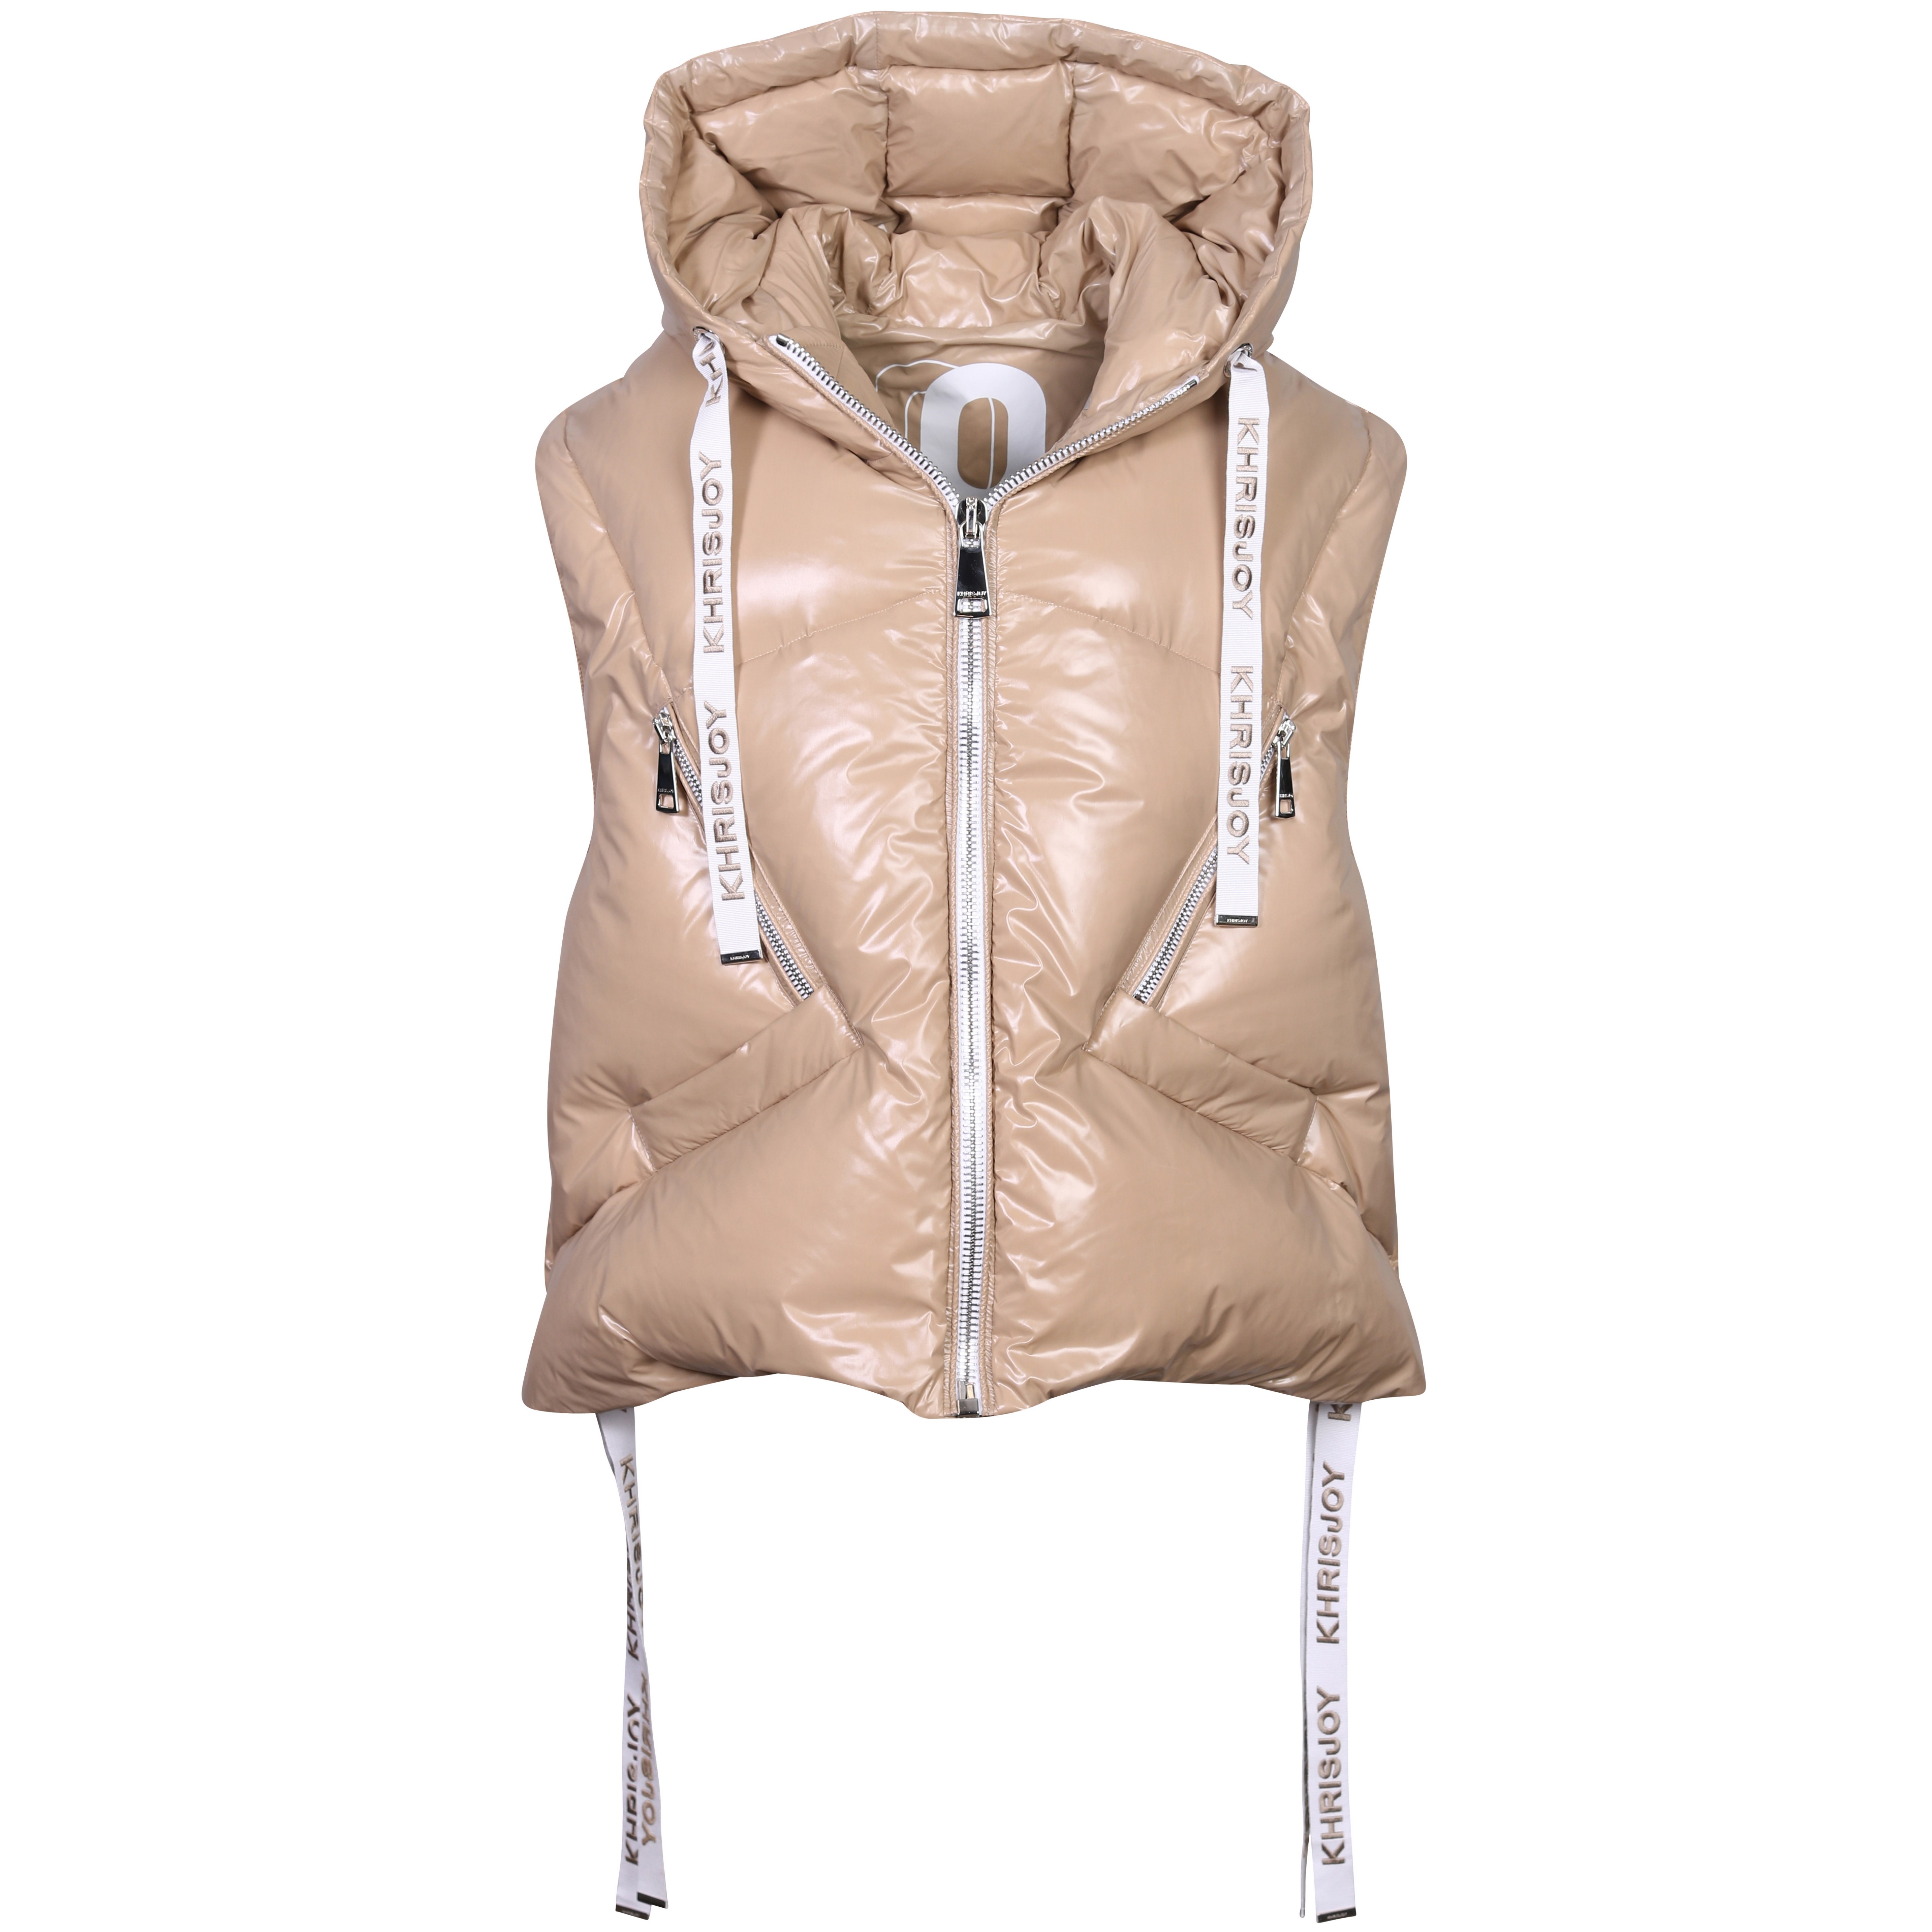 Khrisjoy Iconic Puffer Vest in Shiny Champagne XS / 00